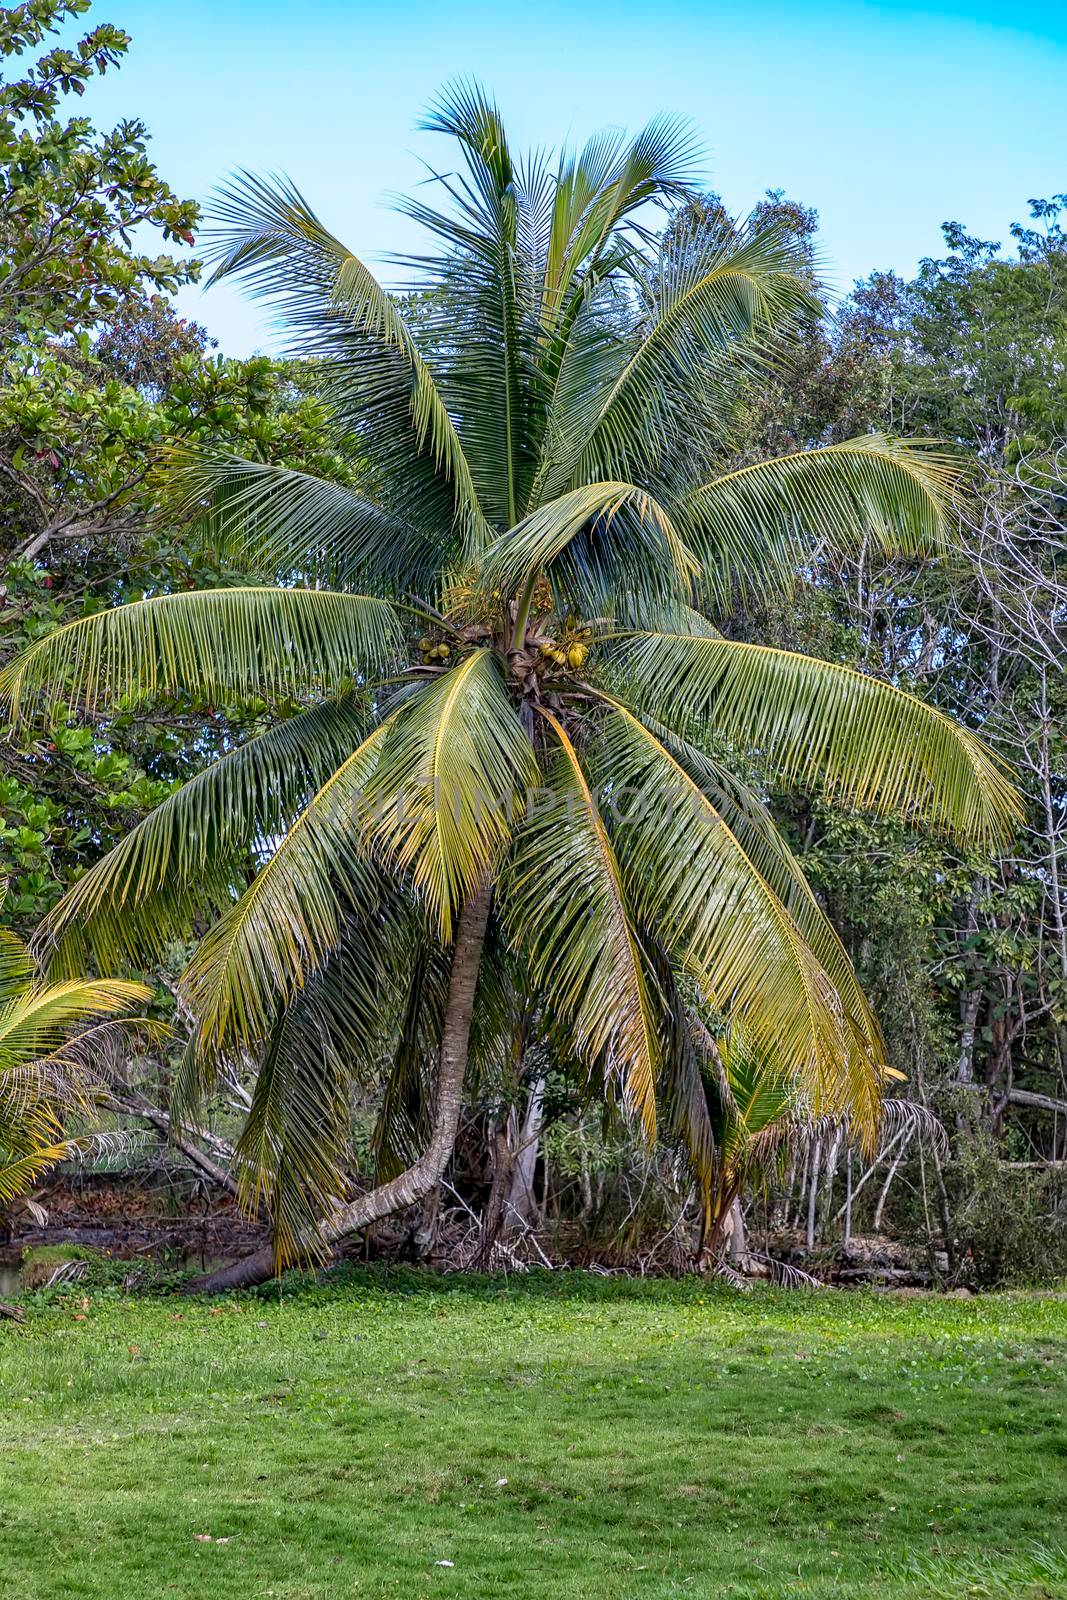 Coconut palm tree at a park in a tropical location. Vertical view by EdVal